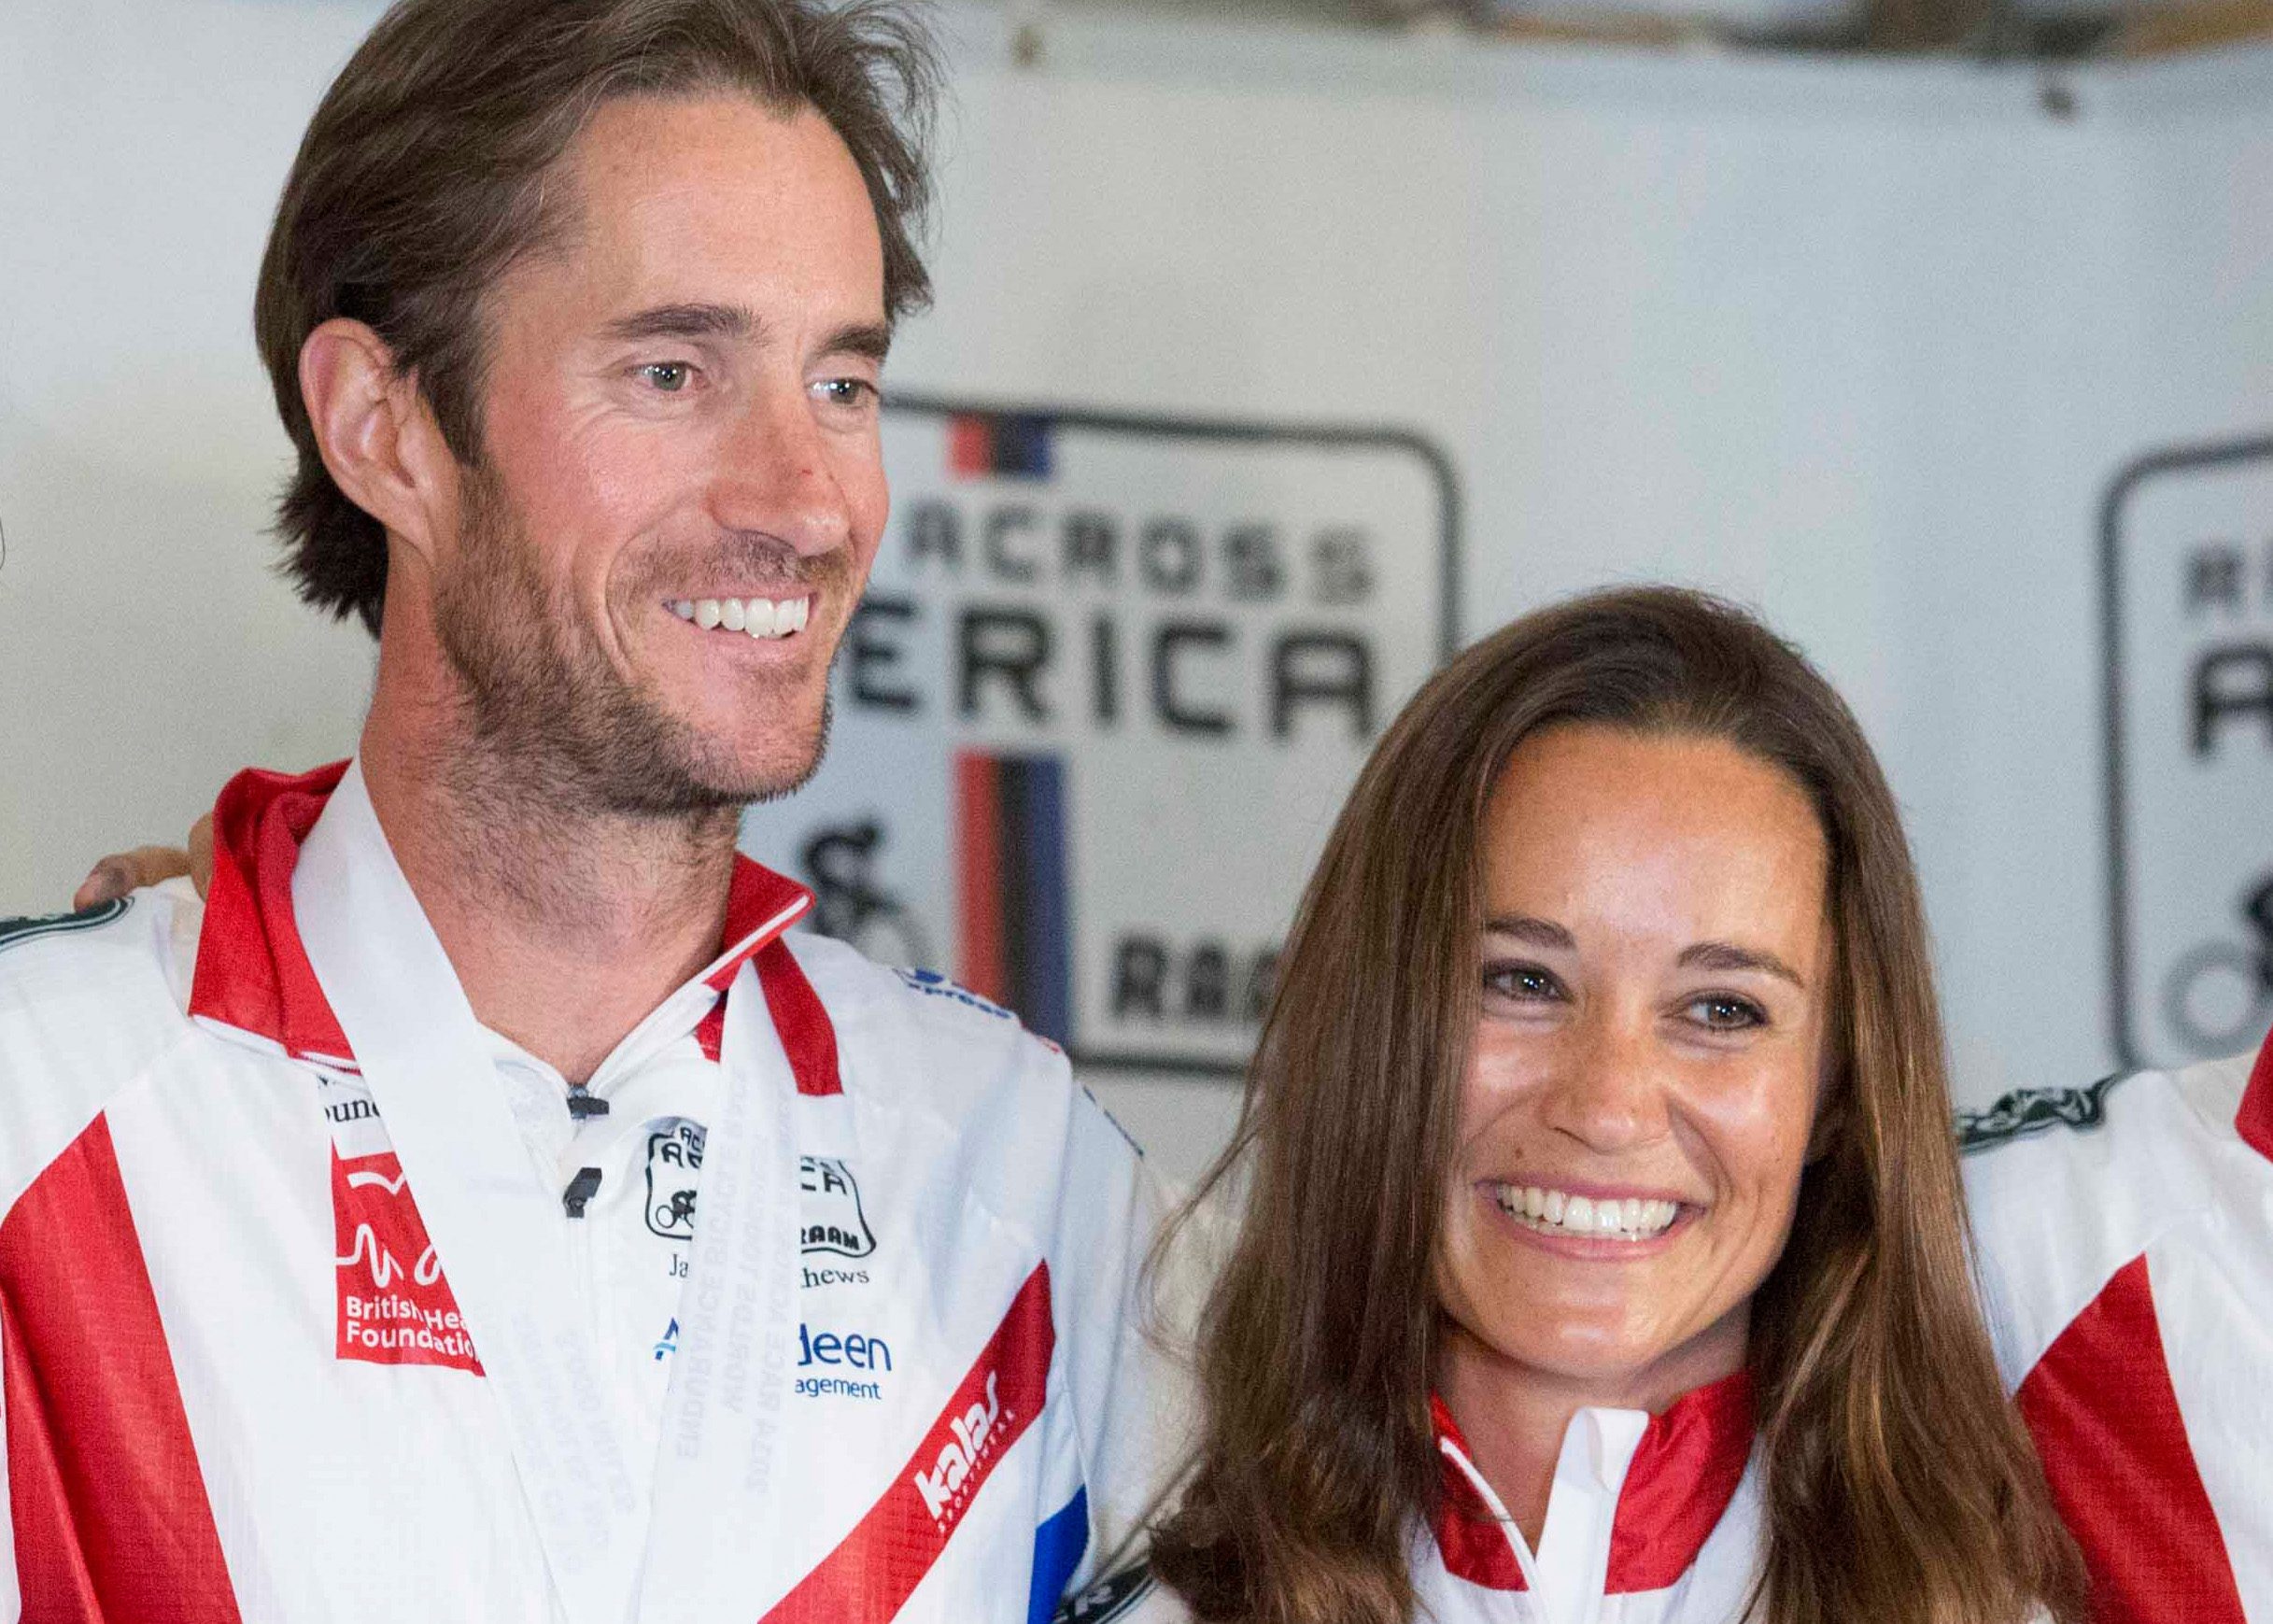 Prince William’s sister-in-law Pippa Middleton to marry